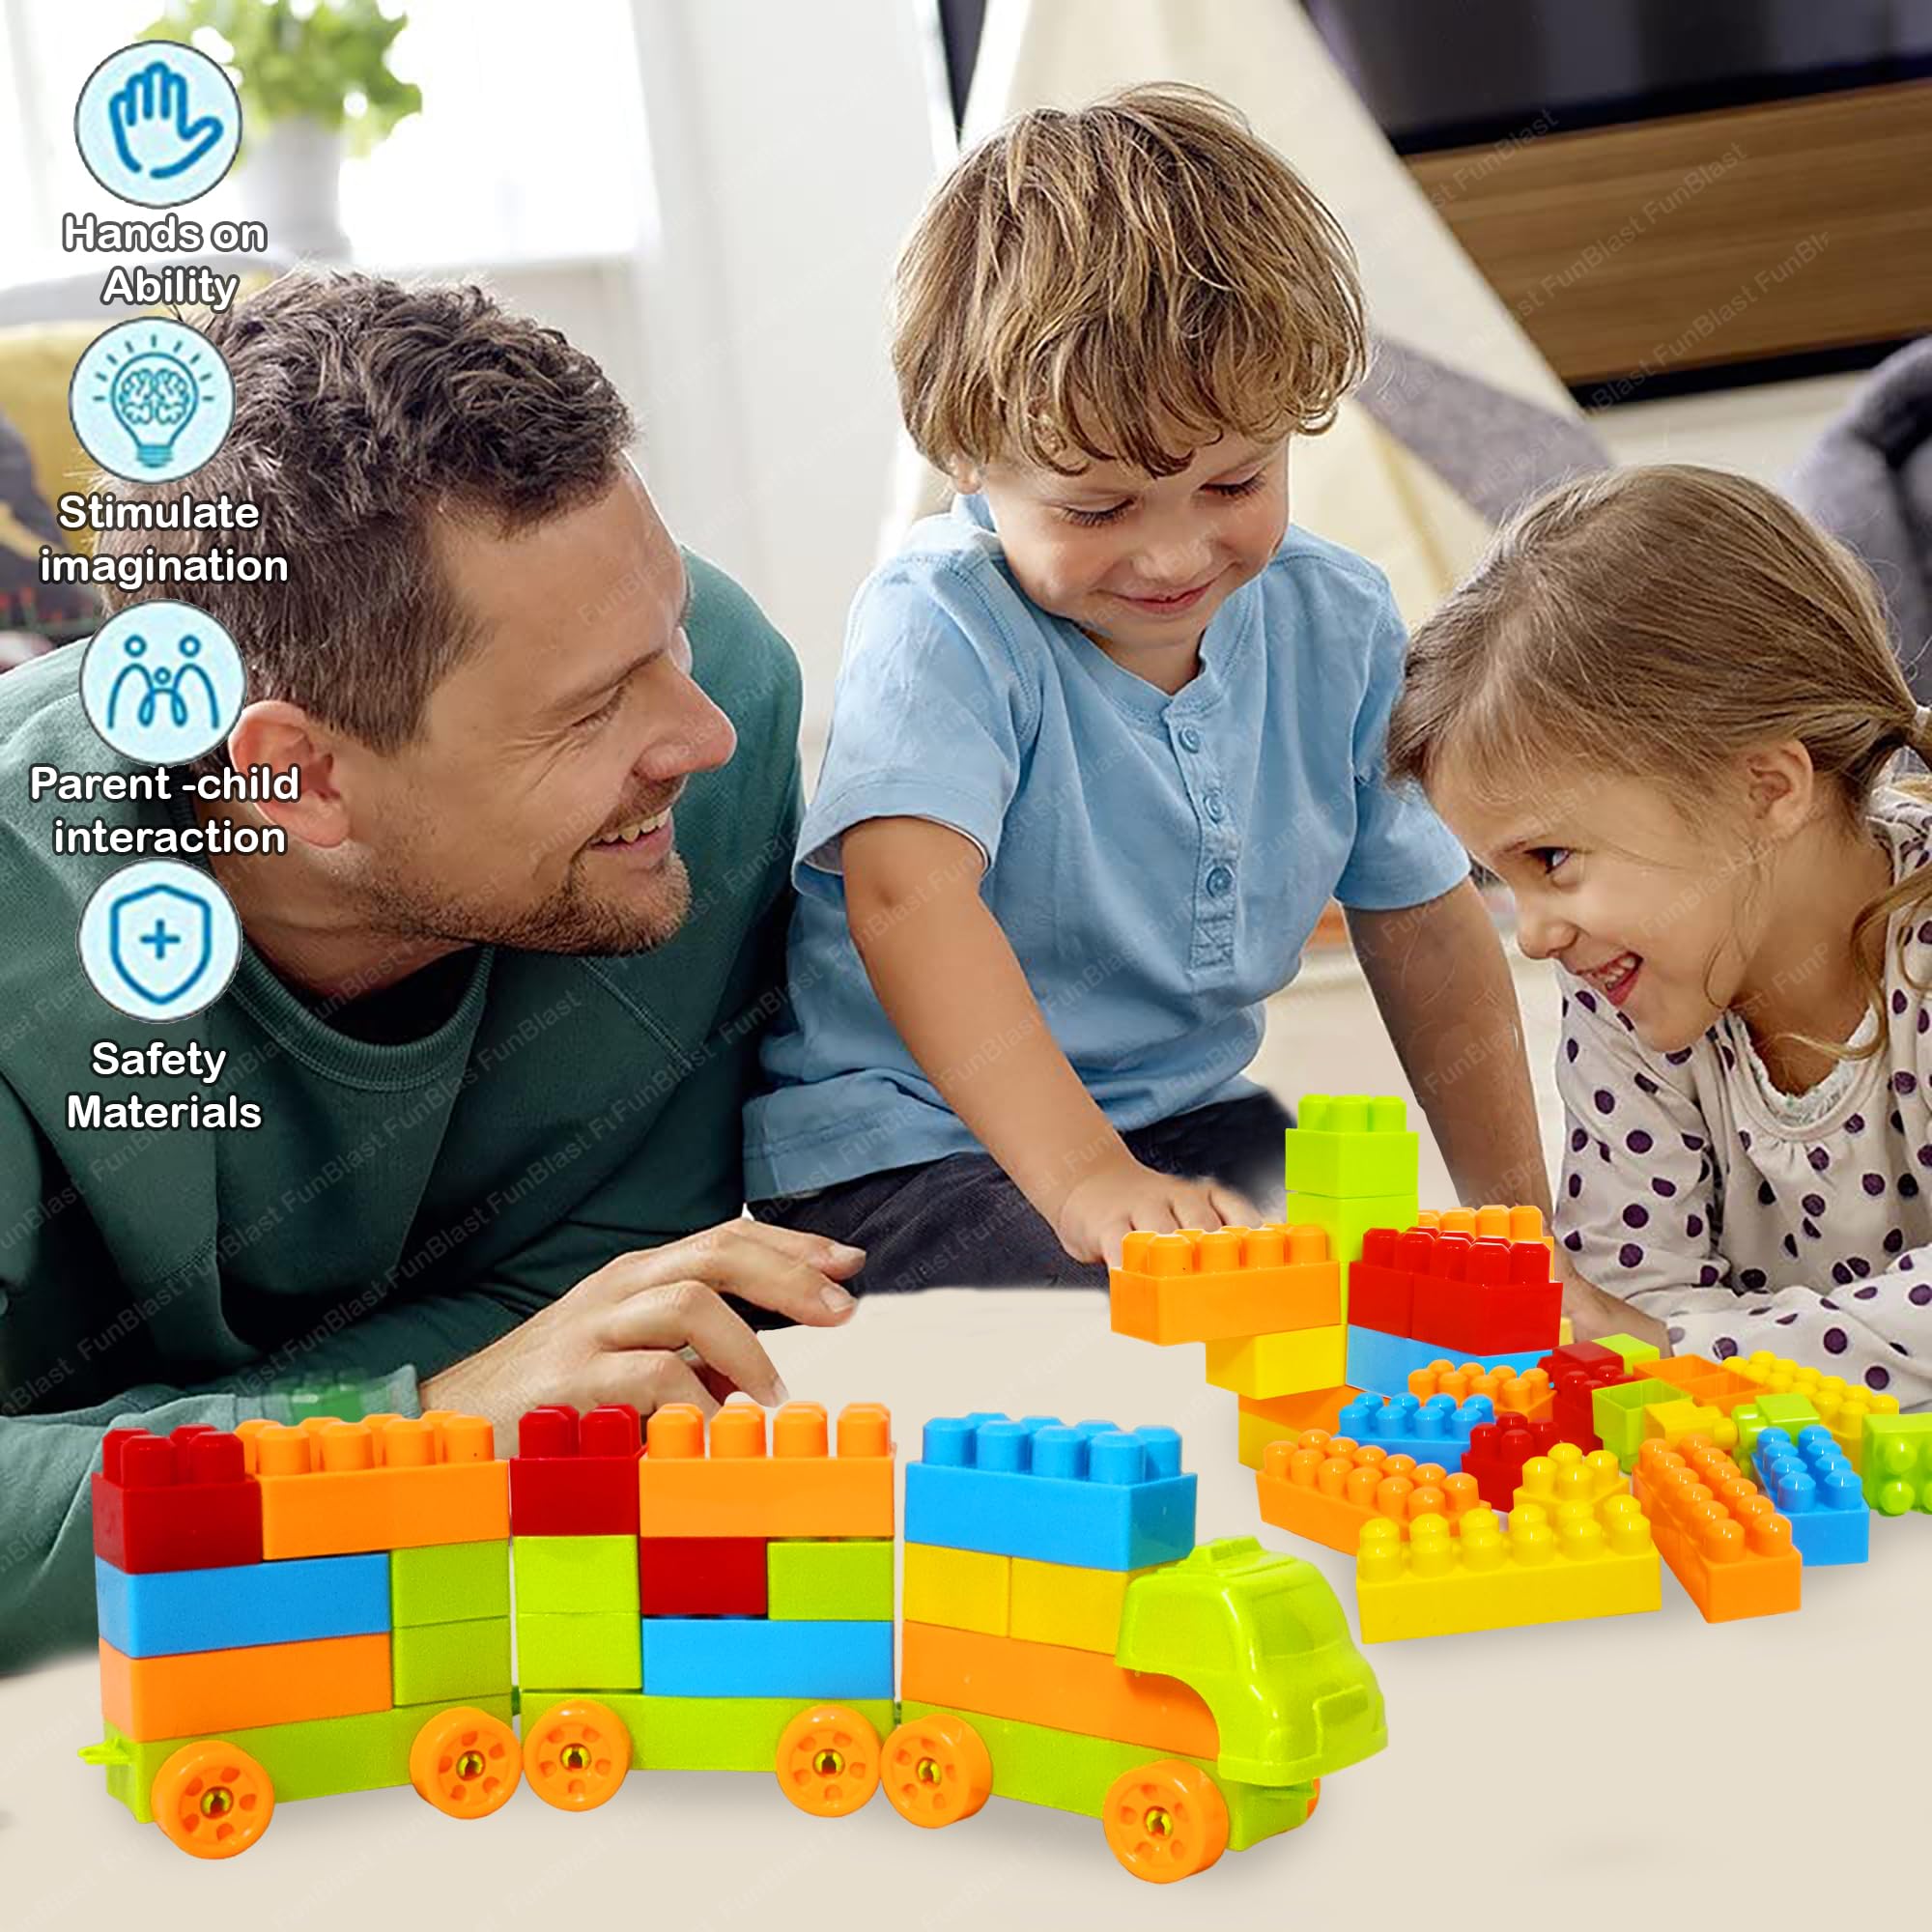 Building Blocks for Kids with Wheel, Bag Packing, Best Gift Toy, Multicolor (Set of 50 Pcs)